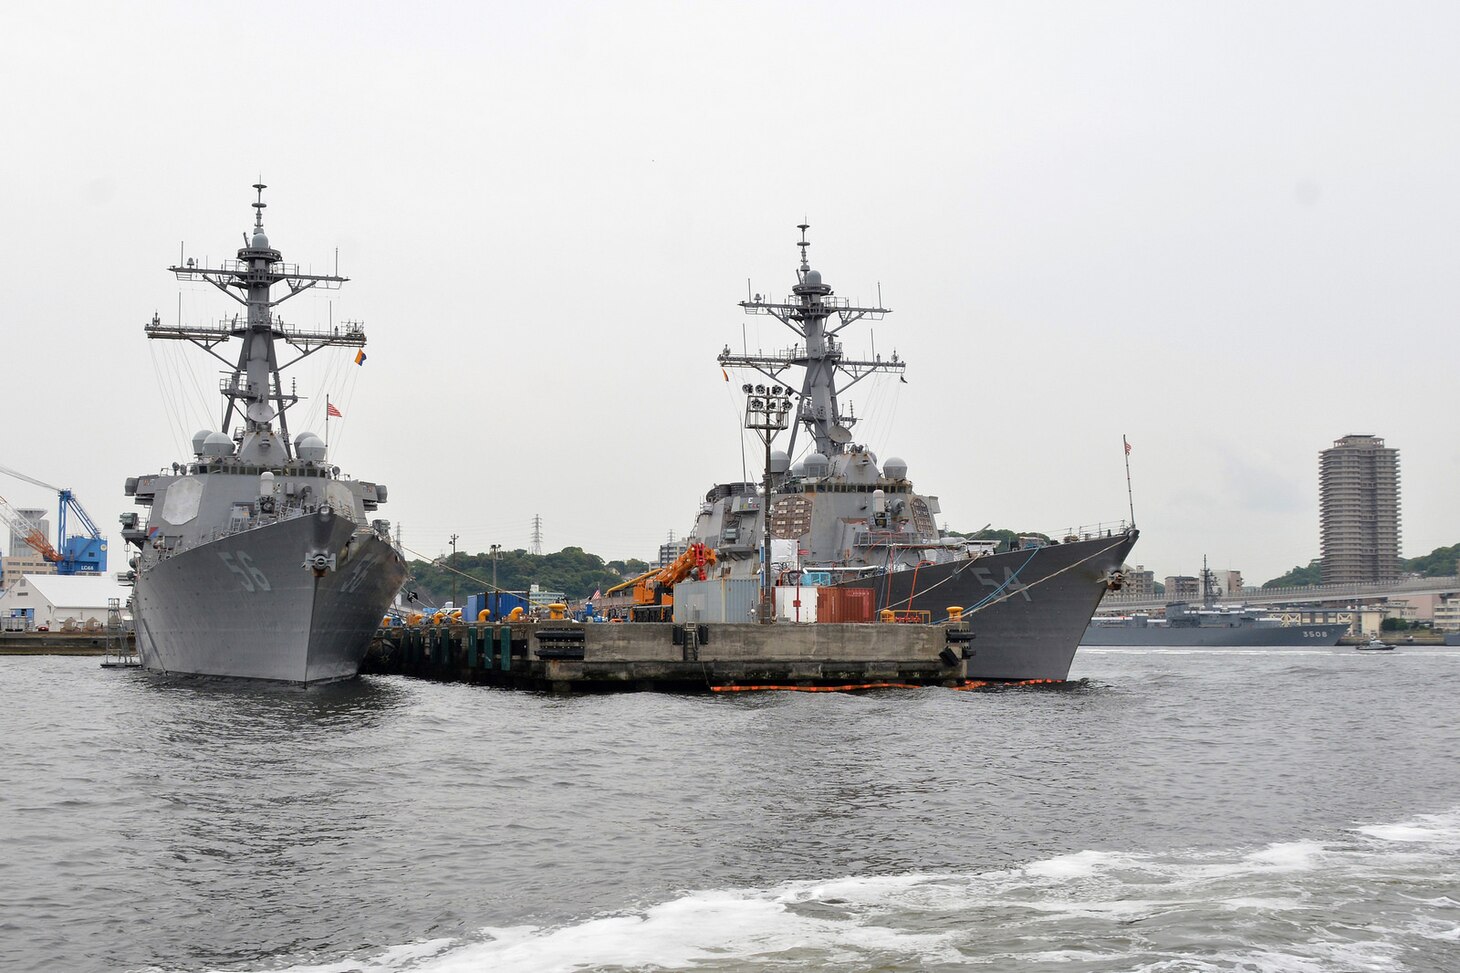 The Arleigh-Burke-class guided-missile destroyers USS John S. McCain (DDG 56) and USS Curtis Wilbur (DDG 54) sit pier-side at Fleet Activities (FLEACT) Yokosuka, May 16, 2017. FLEACT Yokosuka provides, maintains, and operates base facilities and services in support of 7th Fleet's forward-deployed naval forces, 71 tenant commands, and 26,000 military and civilian personnel. 